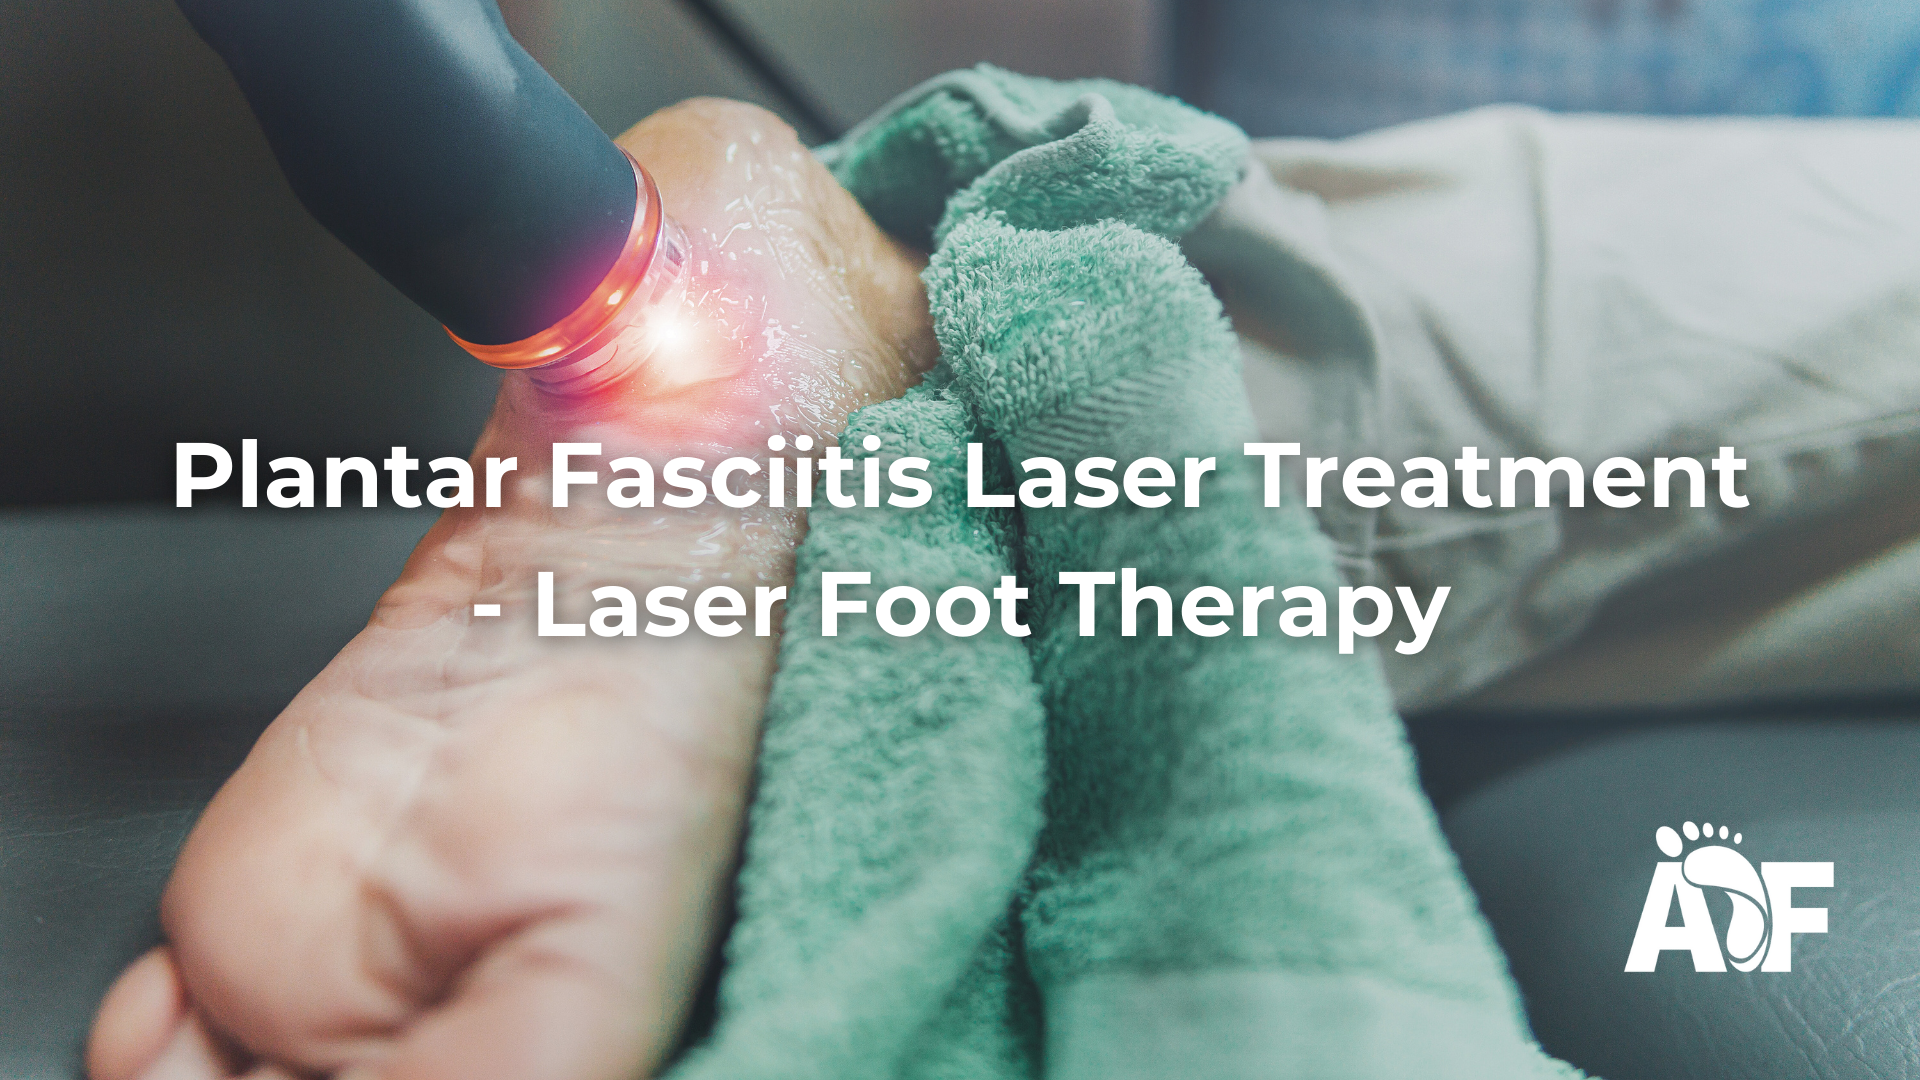 Plantar Fasciitis Laser Treatment – Laser Foot Therapy